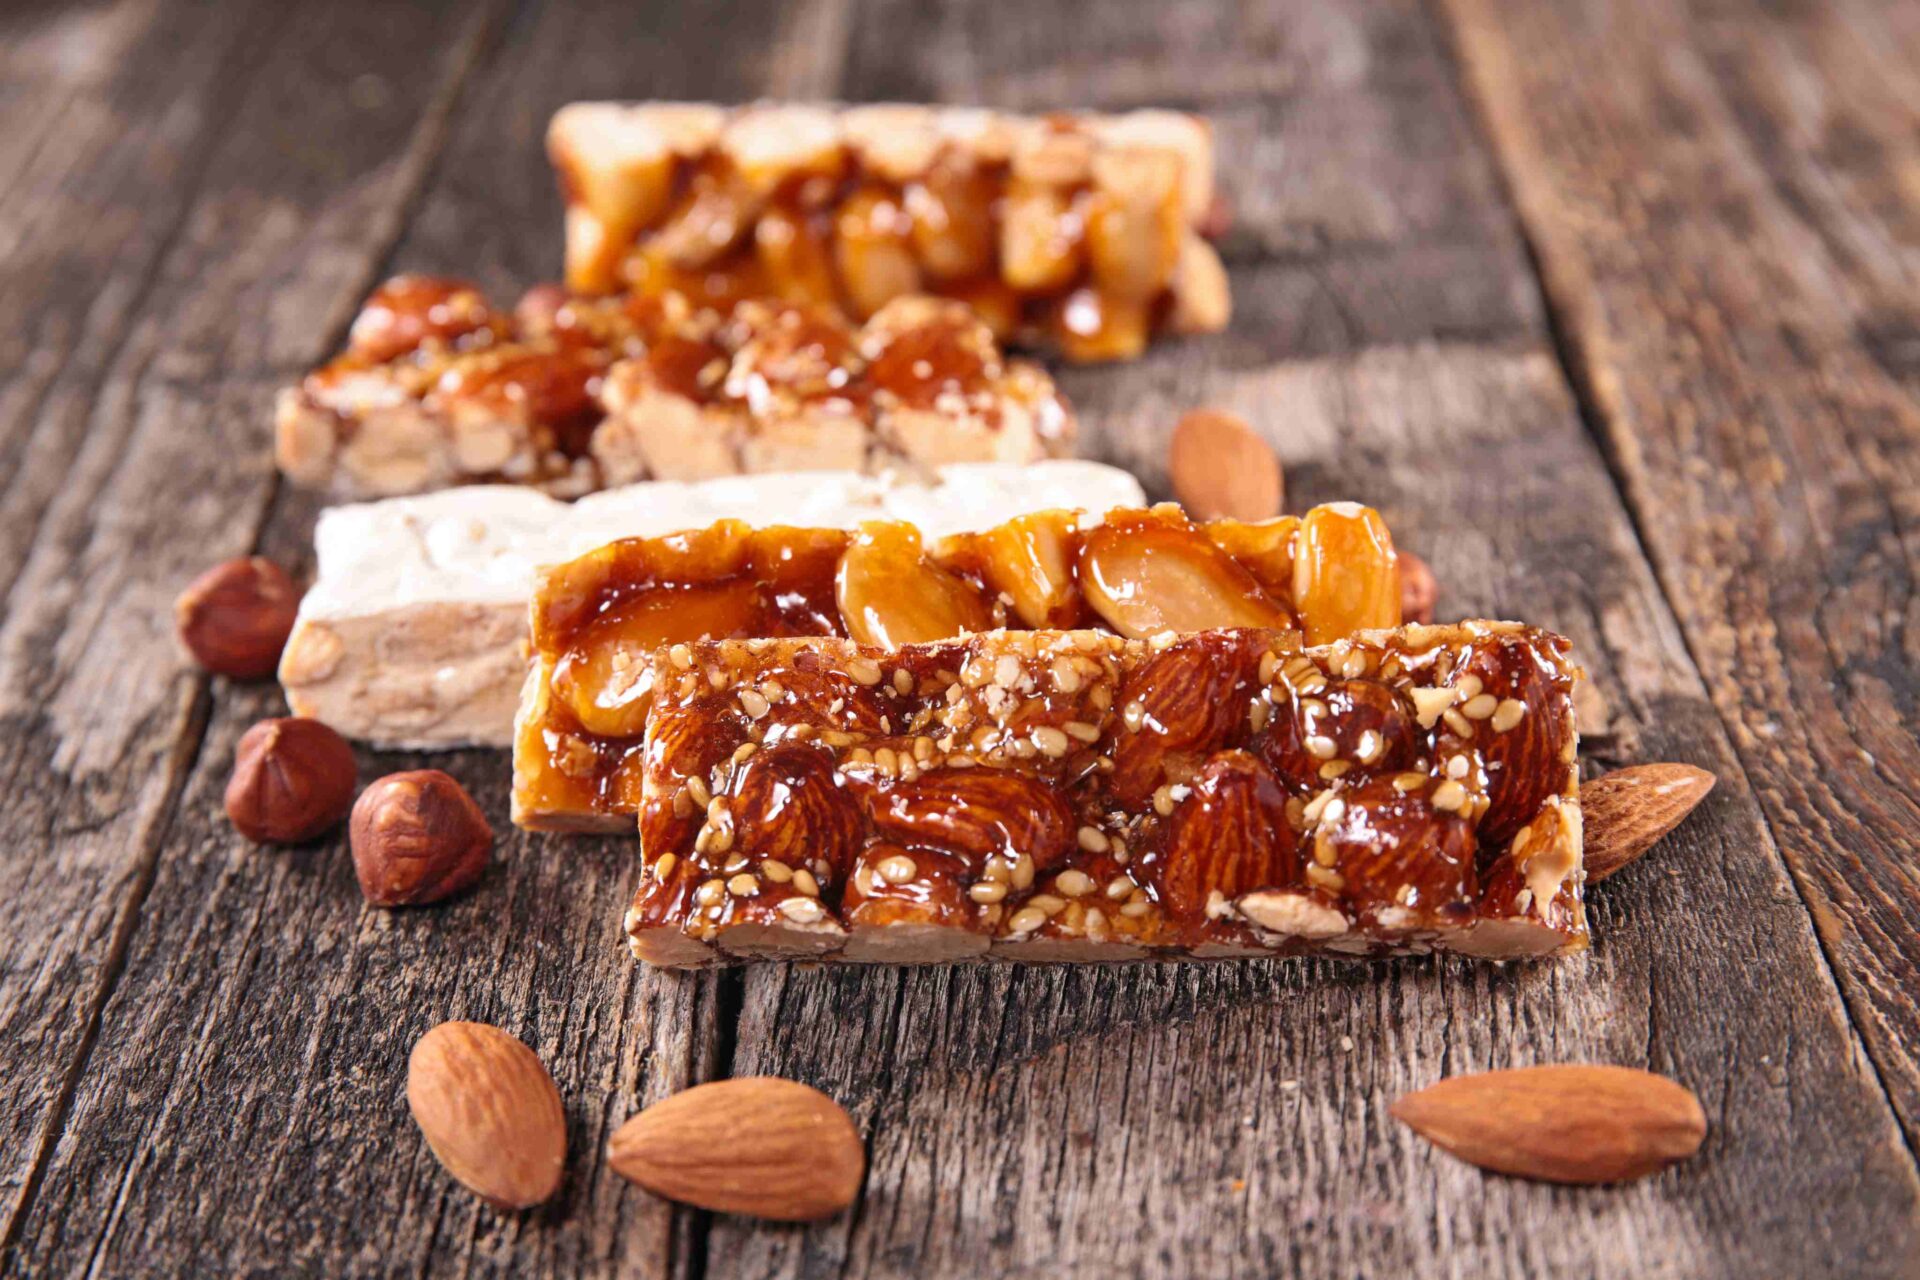 Assortment of Energy, Health and Breakfast Bars made with Whole Natural Almonds